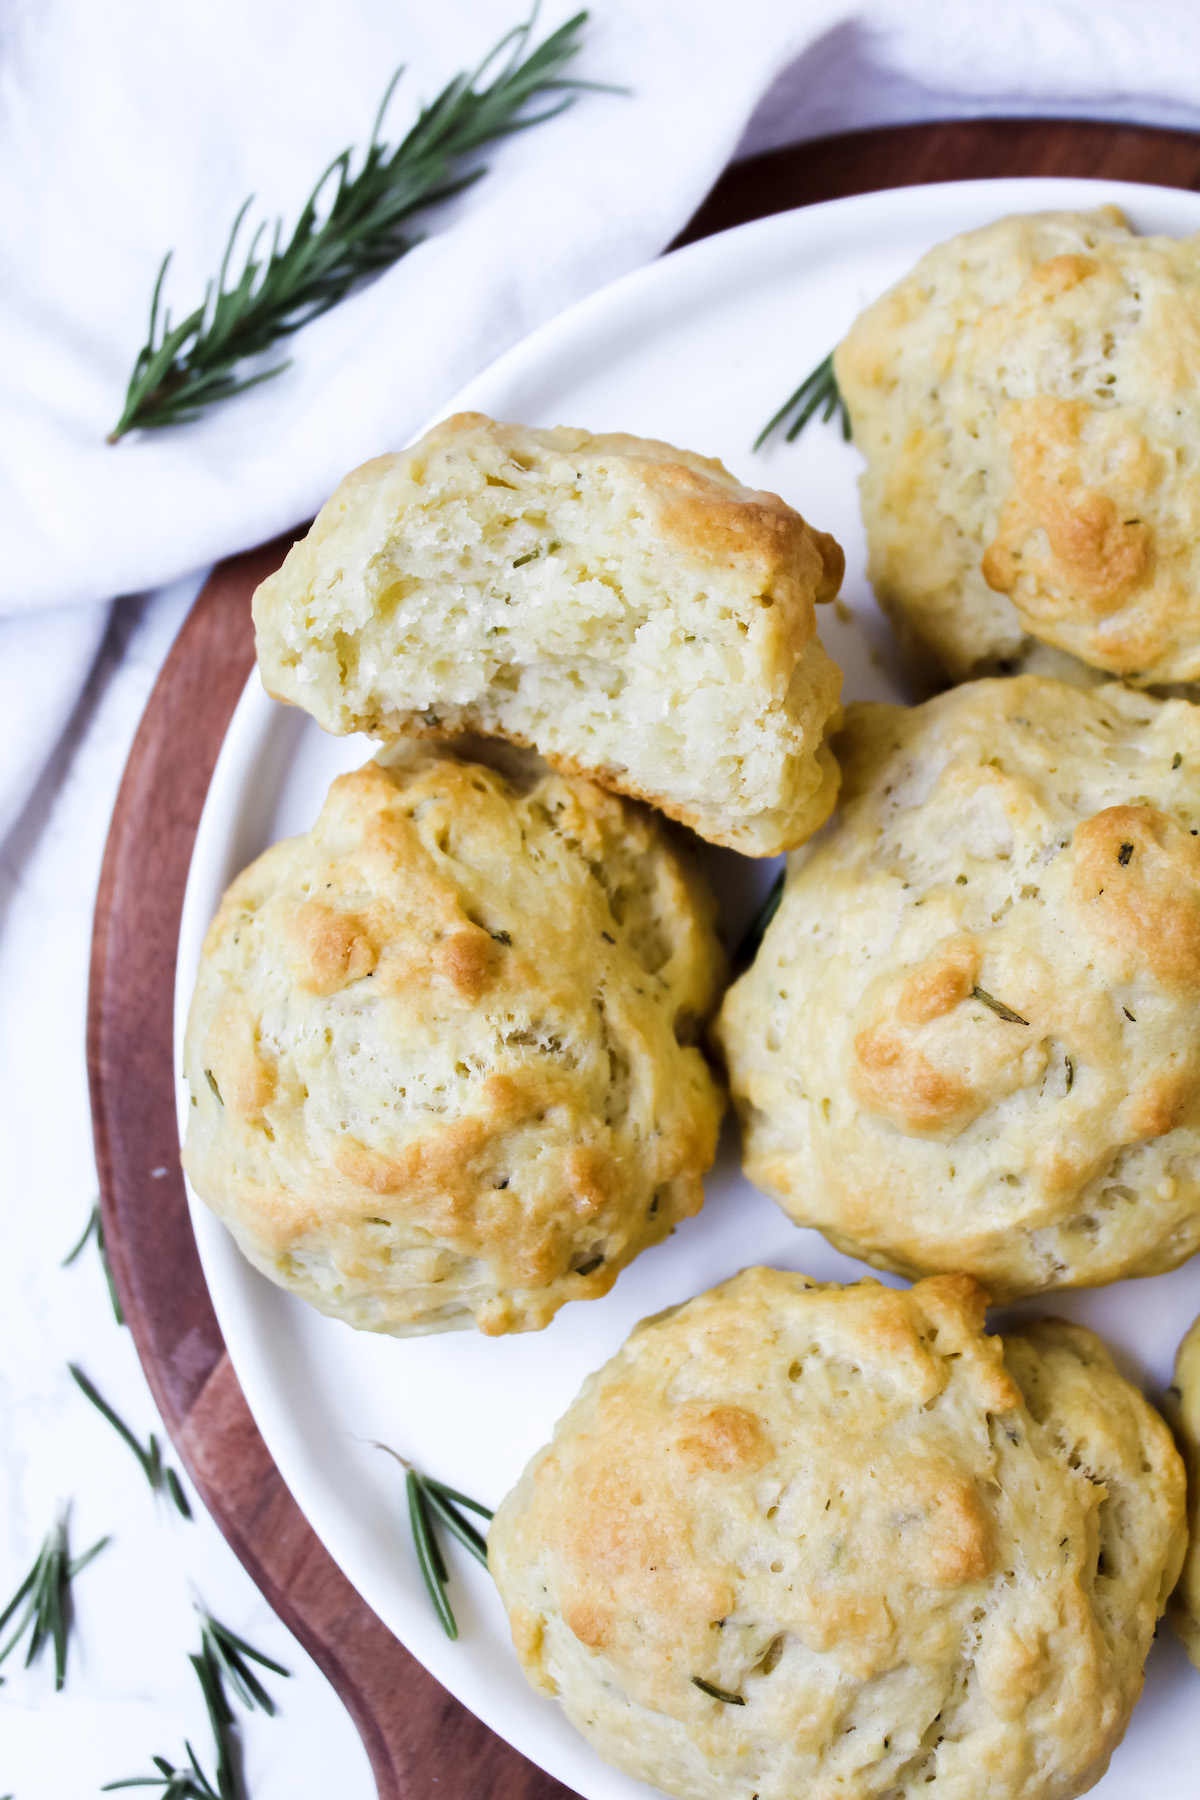 Rosemary Olive Oil Drop Biscuits (vegan, gluten-free option)